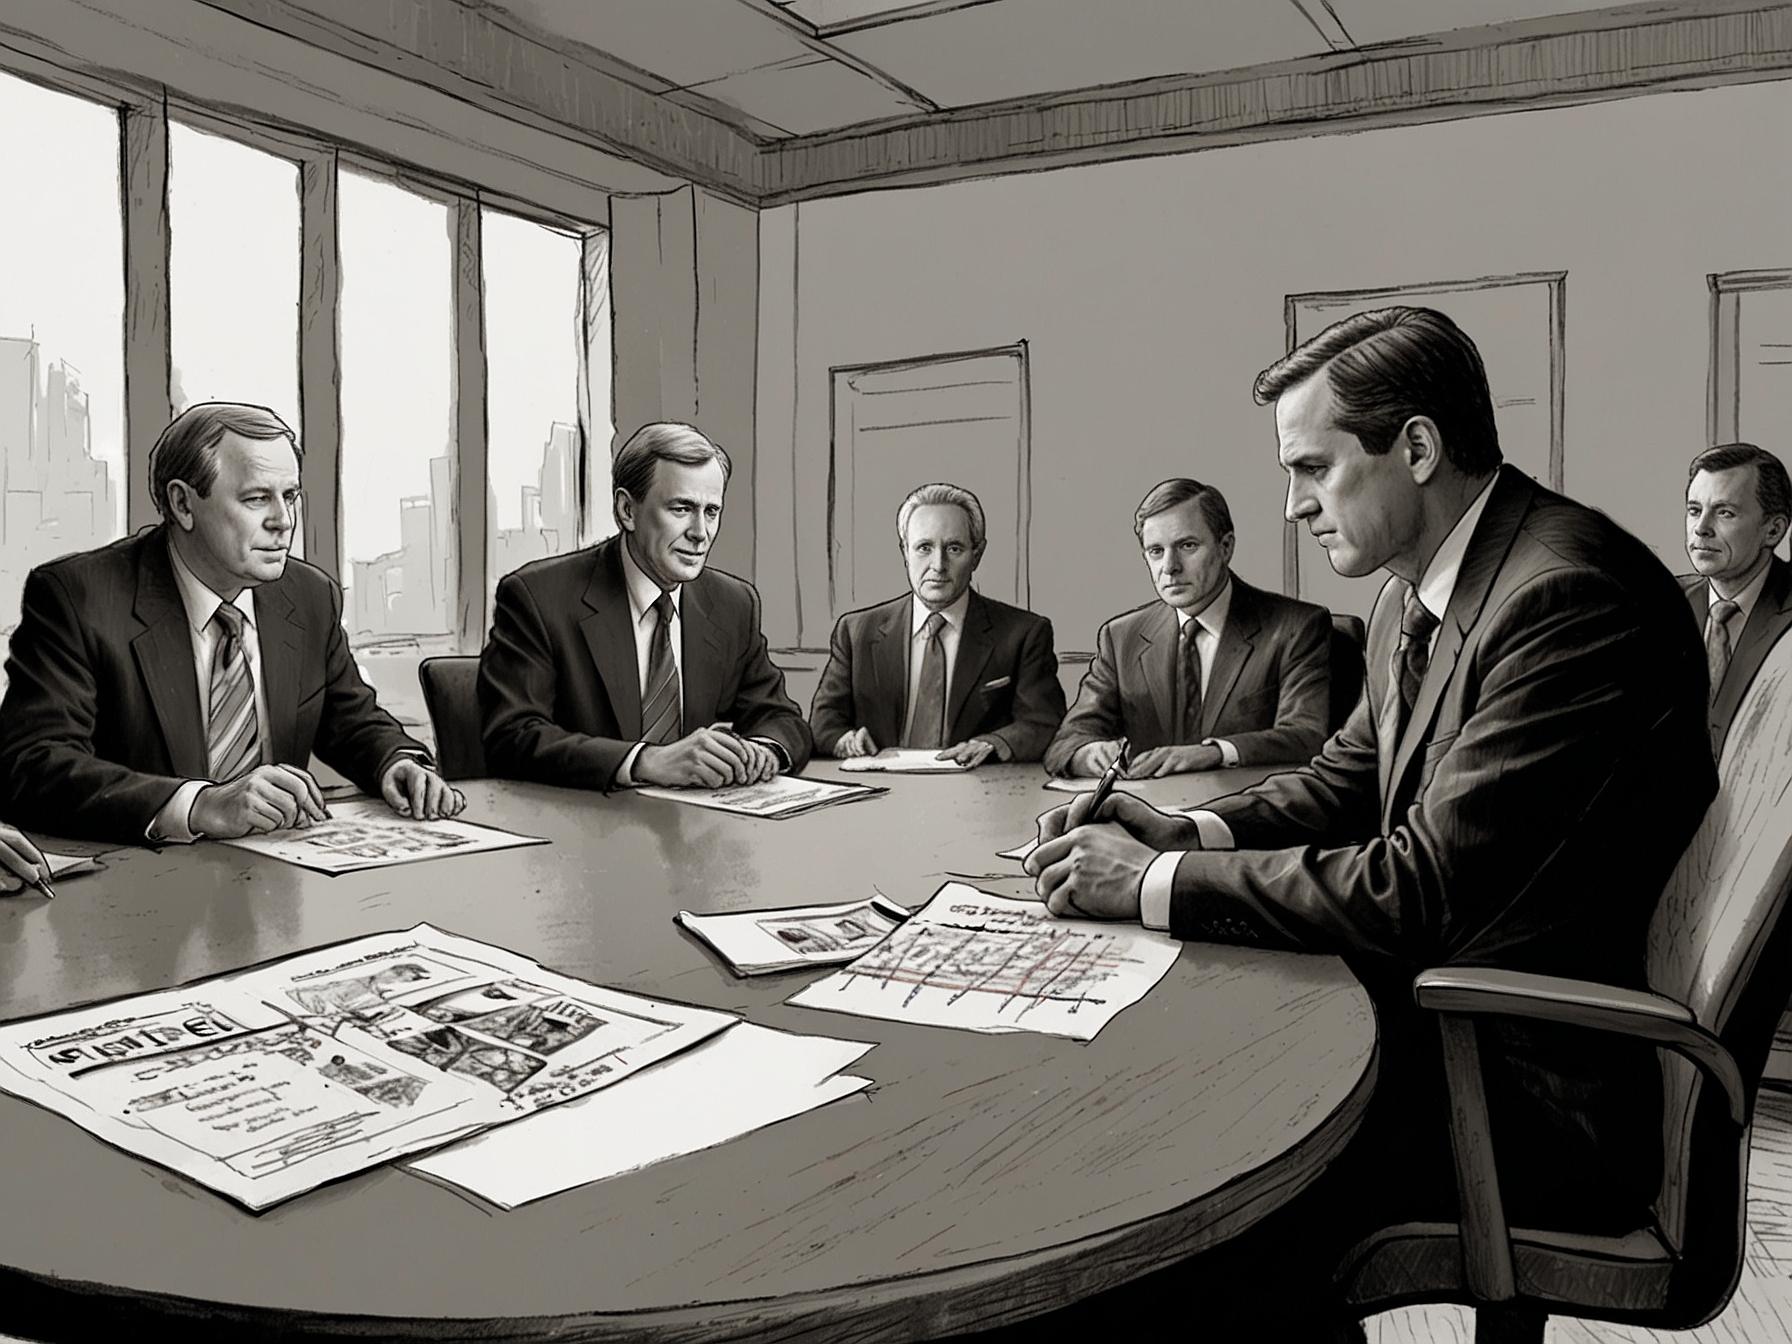 A meeting room with GOP firm operatives discussing campaign strategies. This image illustrates the strategic planning and unusual alliances that influence election outcomes.